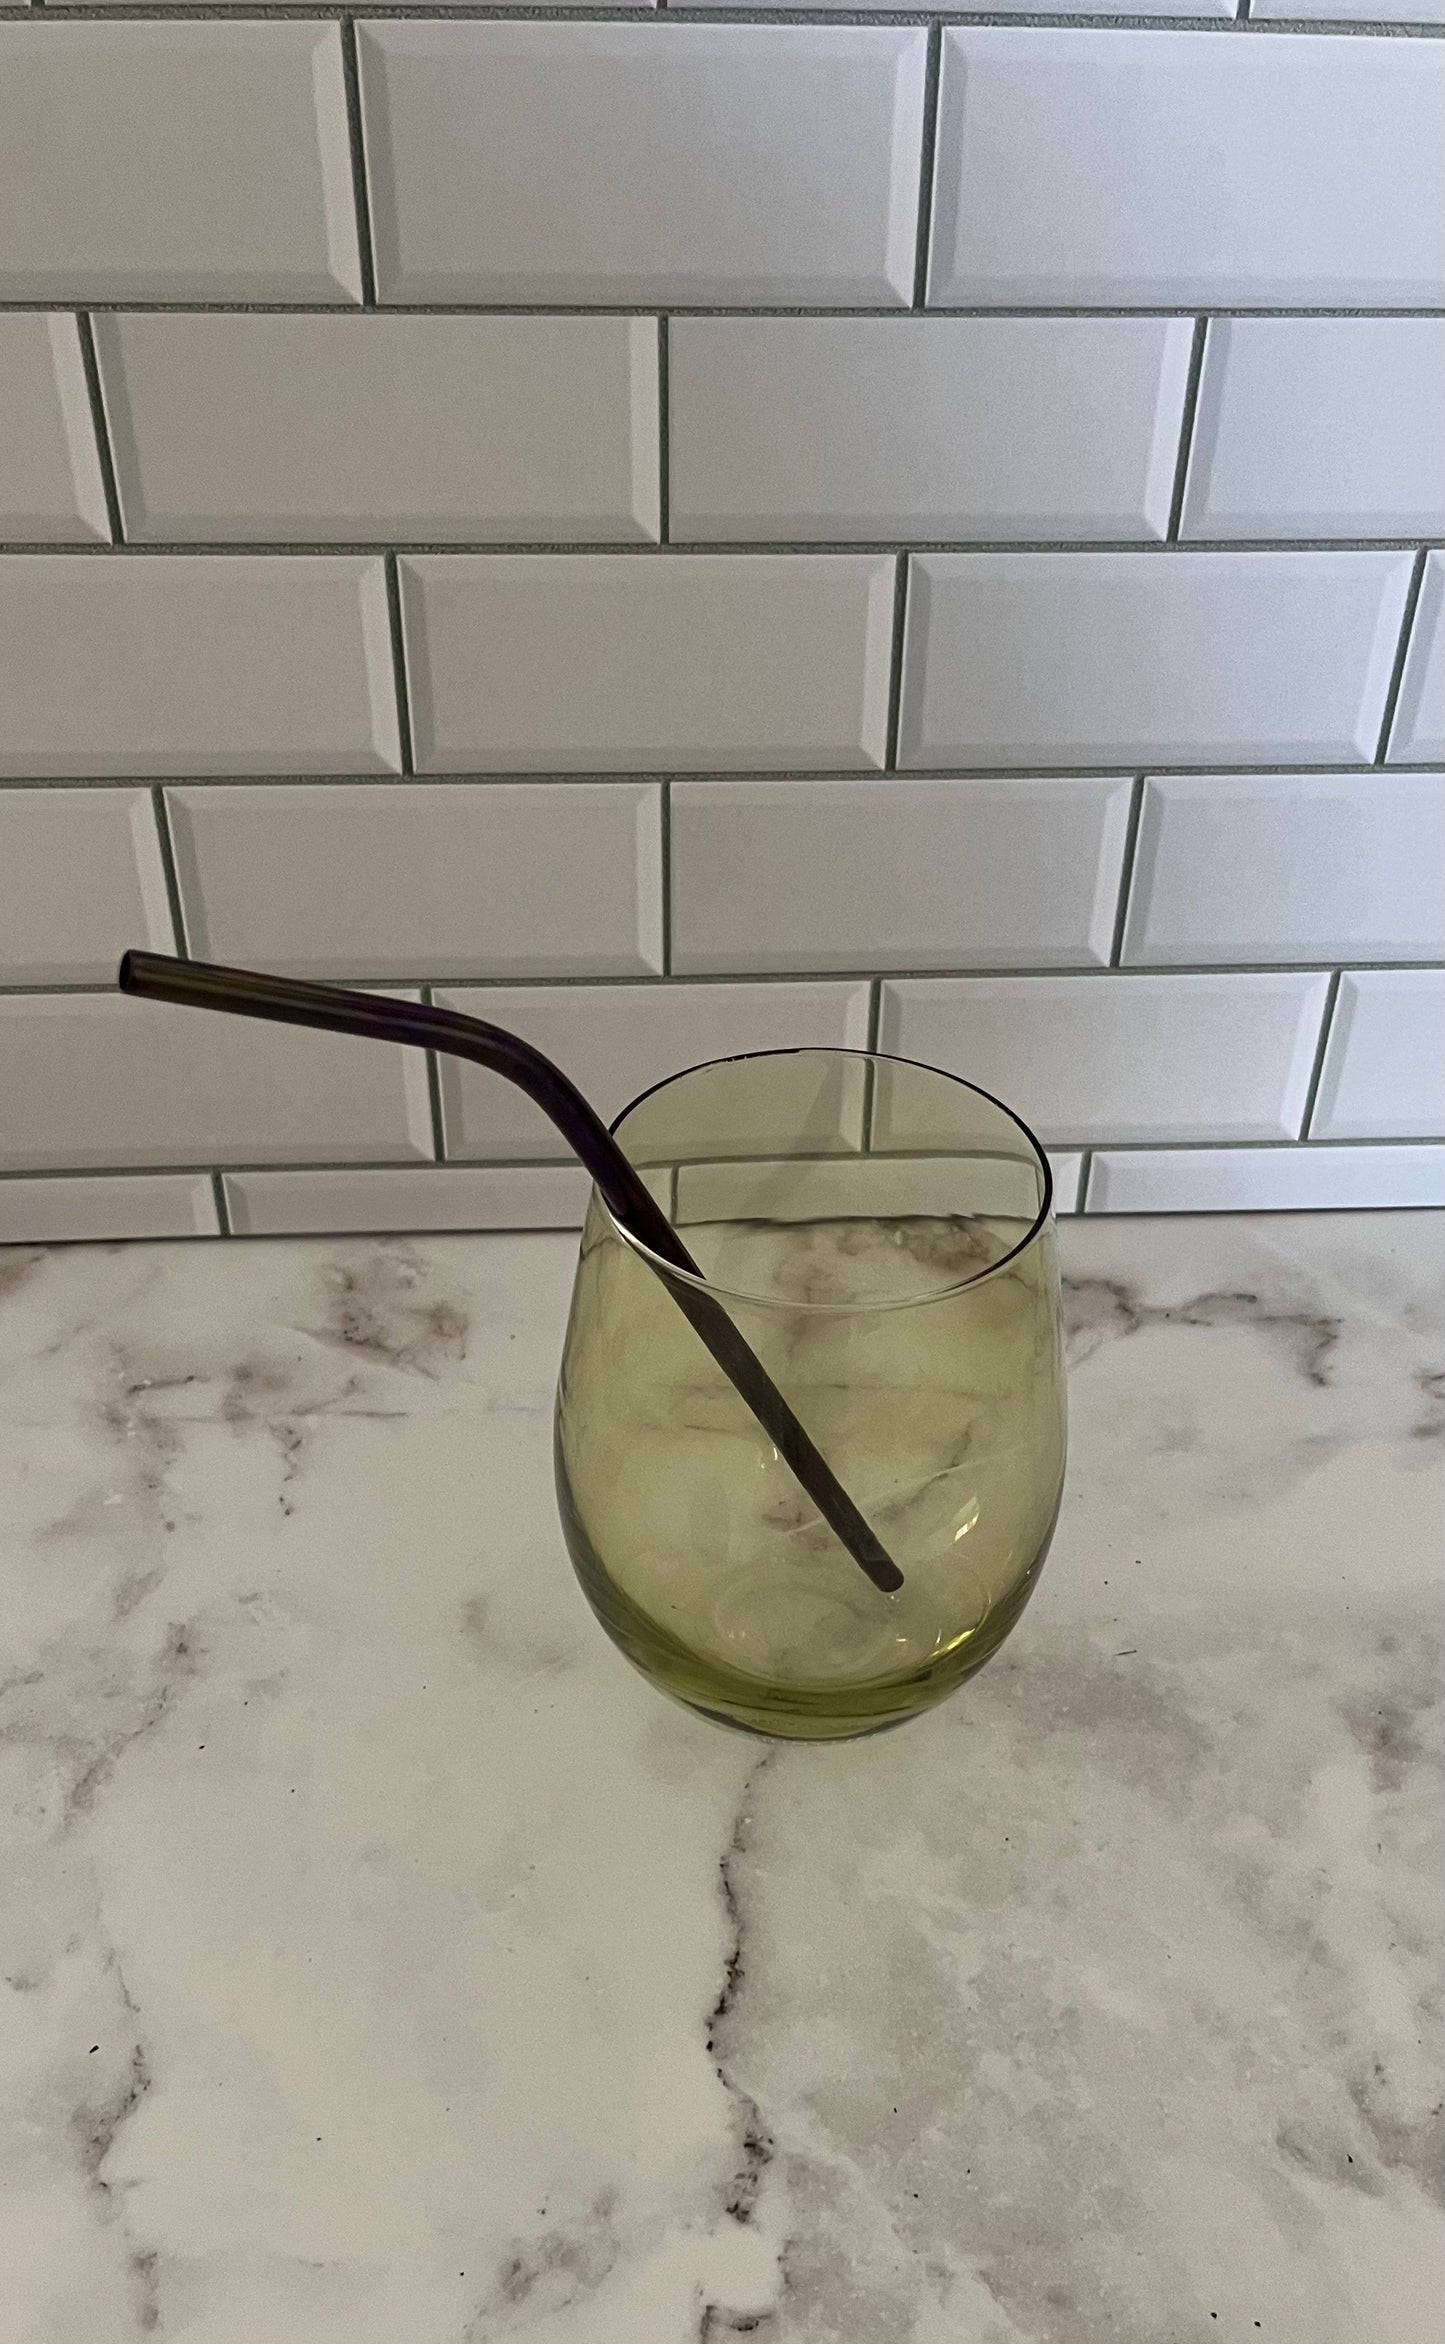 Stainless Steel Straws- 3 Pack